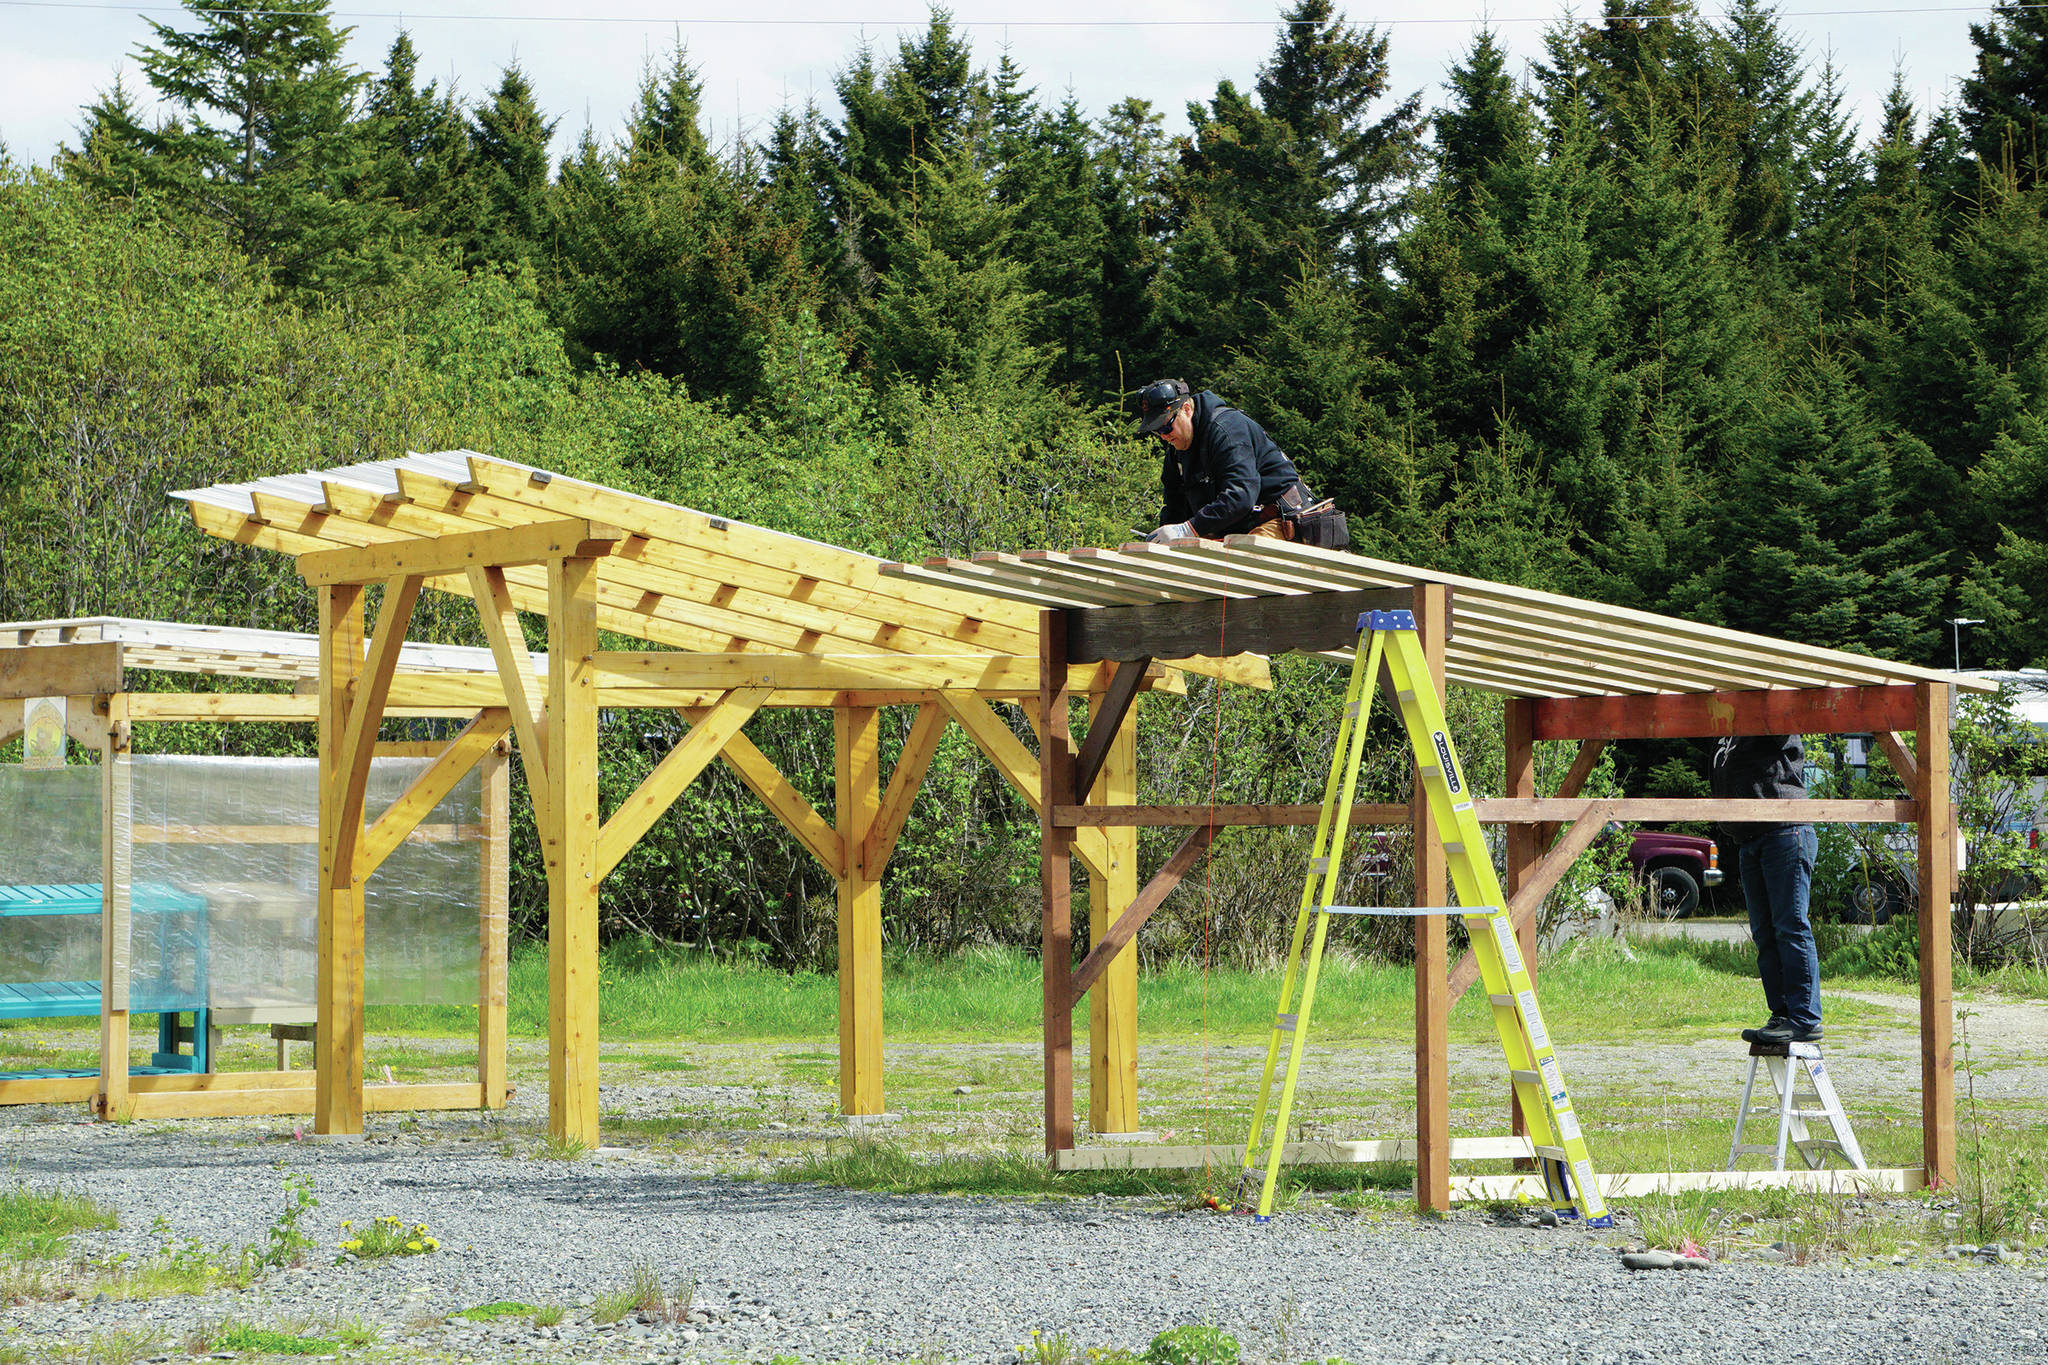 Dave Pleznac works on the roof of the Snowshoe Hollow Farm booth while his wife, Christina Castellanos, helps on Monday, May 25, 2020, at the Homer Farmers Market in Homer, Alaska. The market opens on Saturday, May 30, on Ocean Drive in Homer, Alaska. (Photo by Michael Armstrong/Homer News0